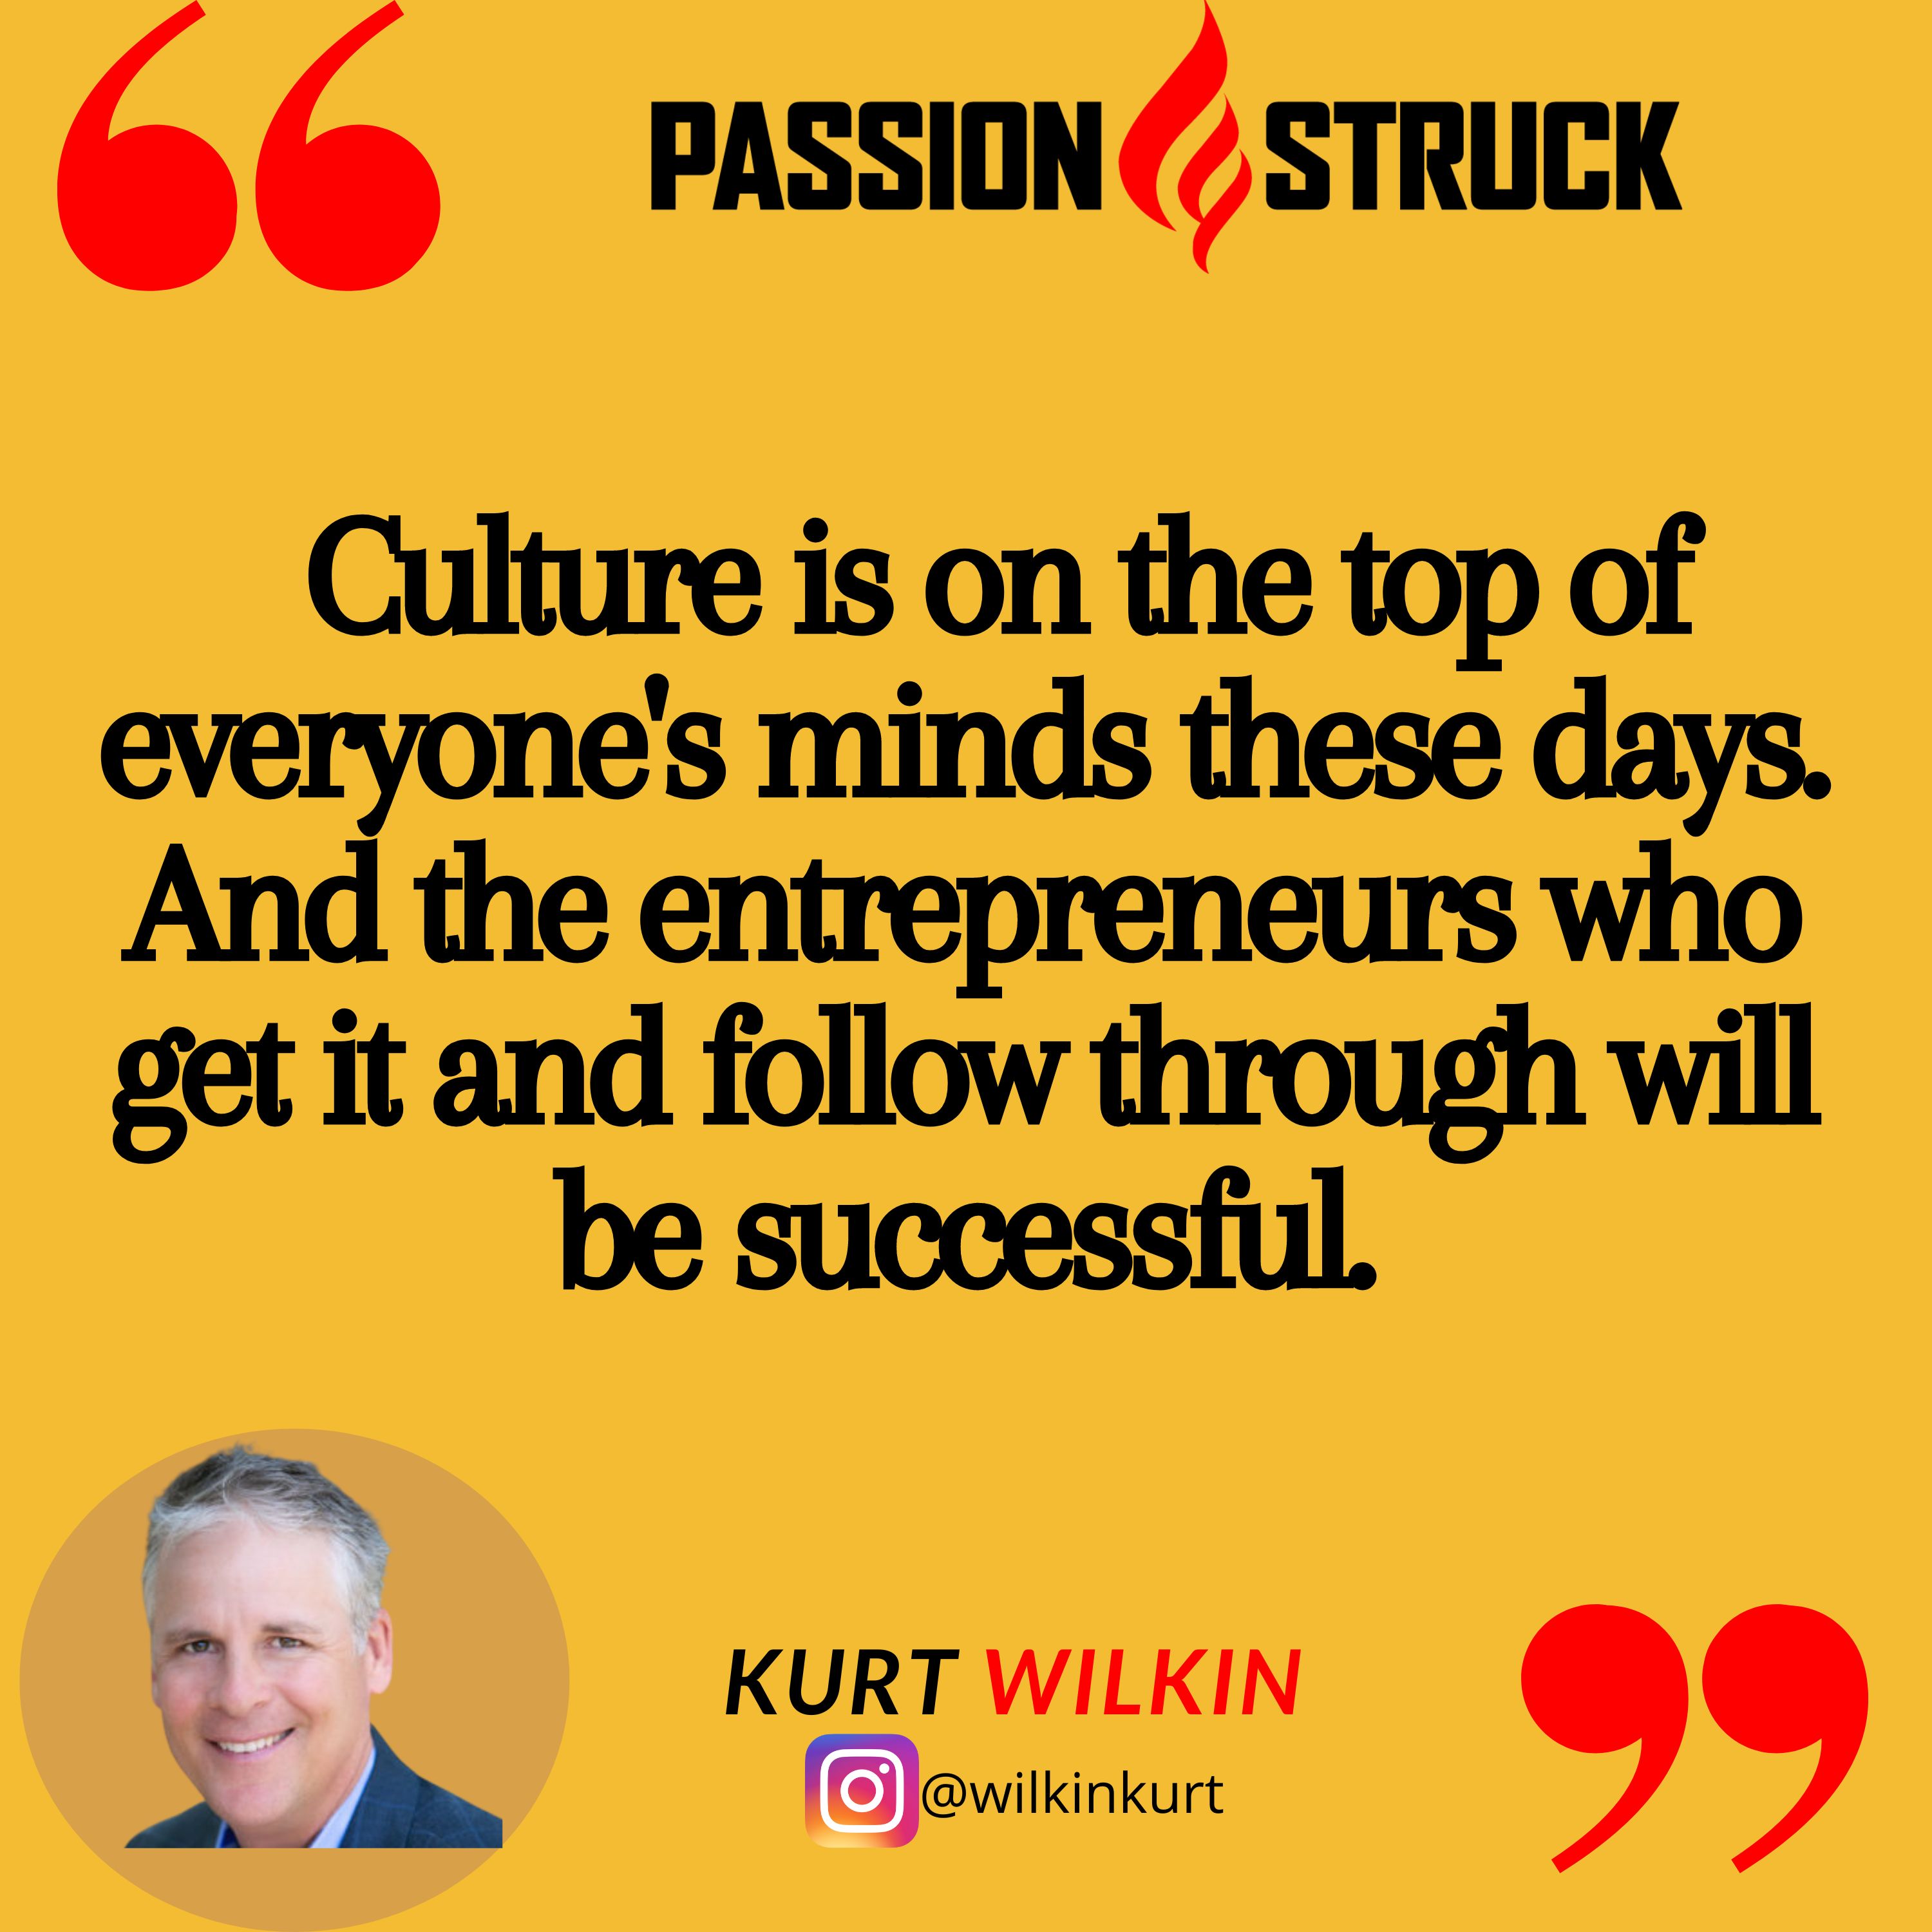 Quote by Kurt Wilkin from the Passion Struck podcast about company culture and its importance for entrepreneurs